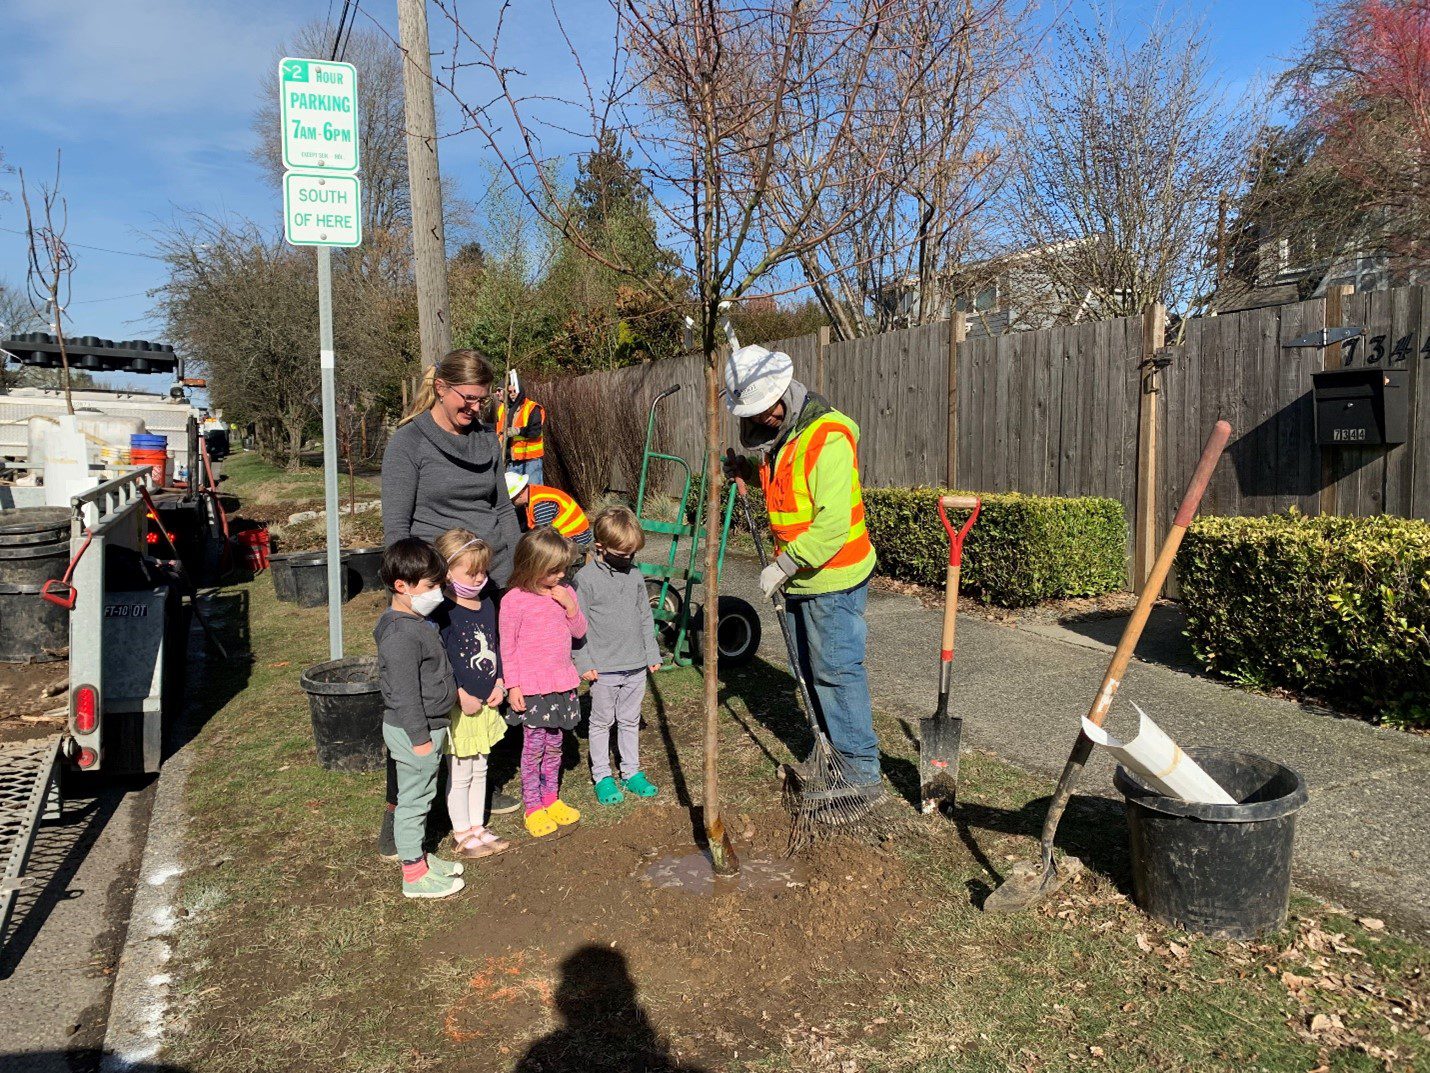 Workers wearing orange and yellow safety vests and hardhats work to plant trees in the city. A woman and four kids watch the work taking place. A work truck, tools, hedges, a fence, and large buildings are in the background.